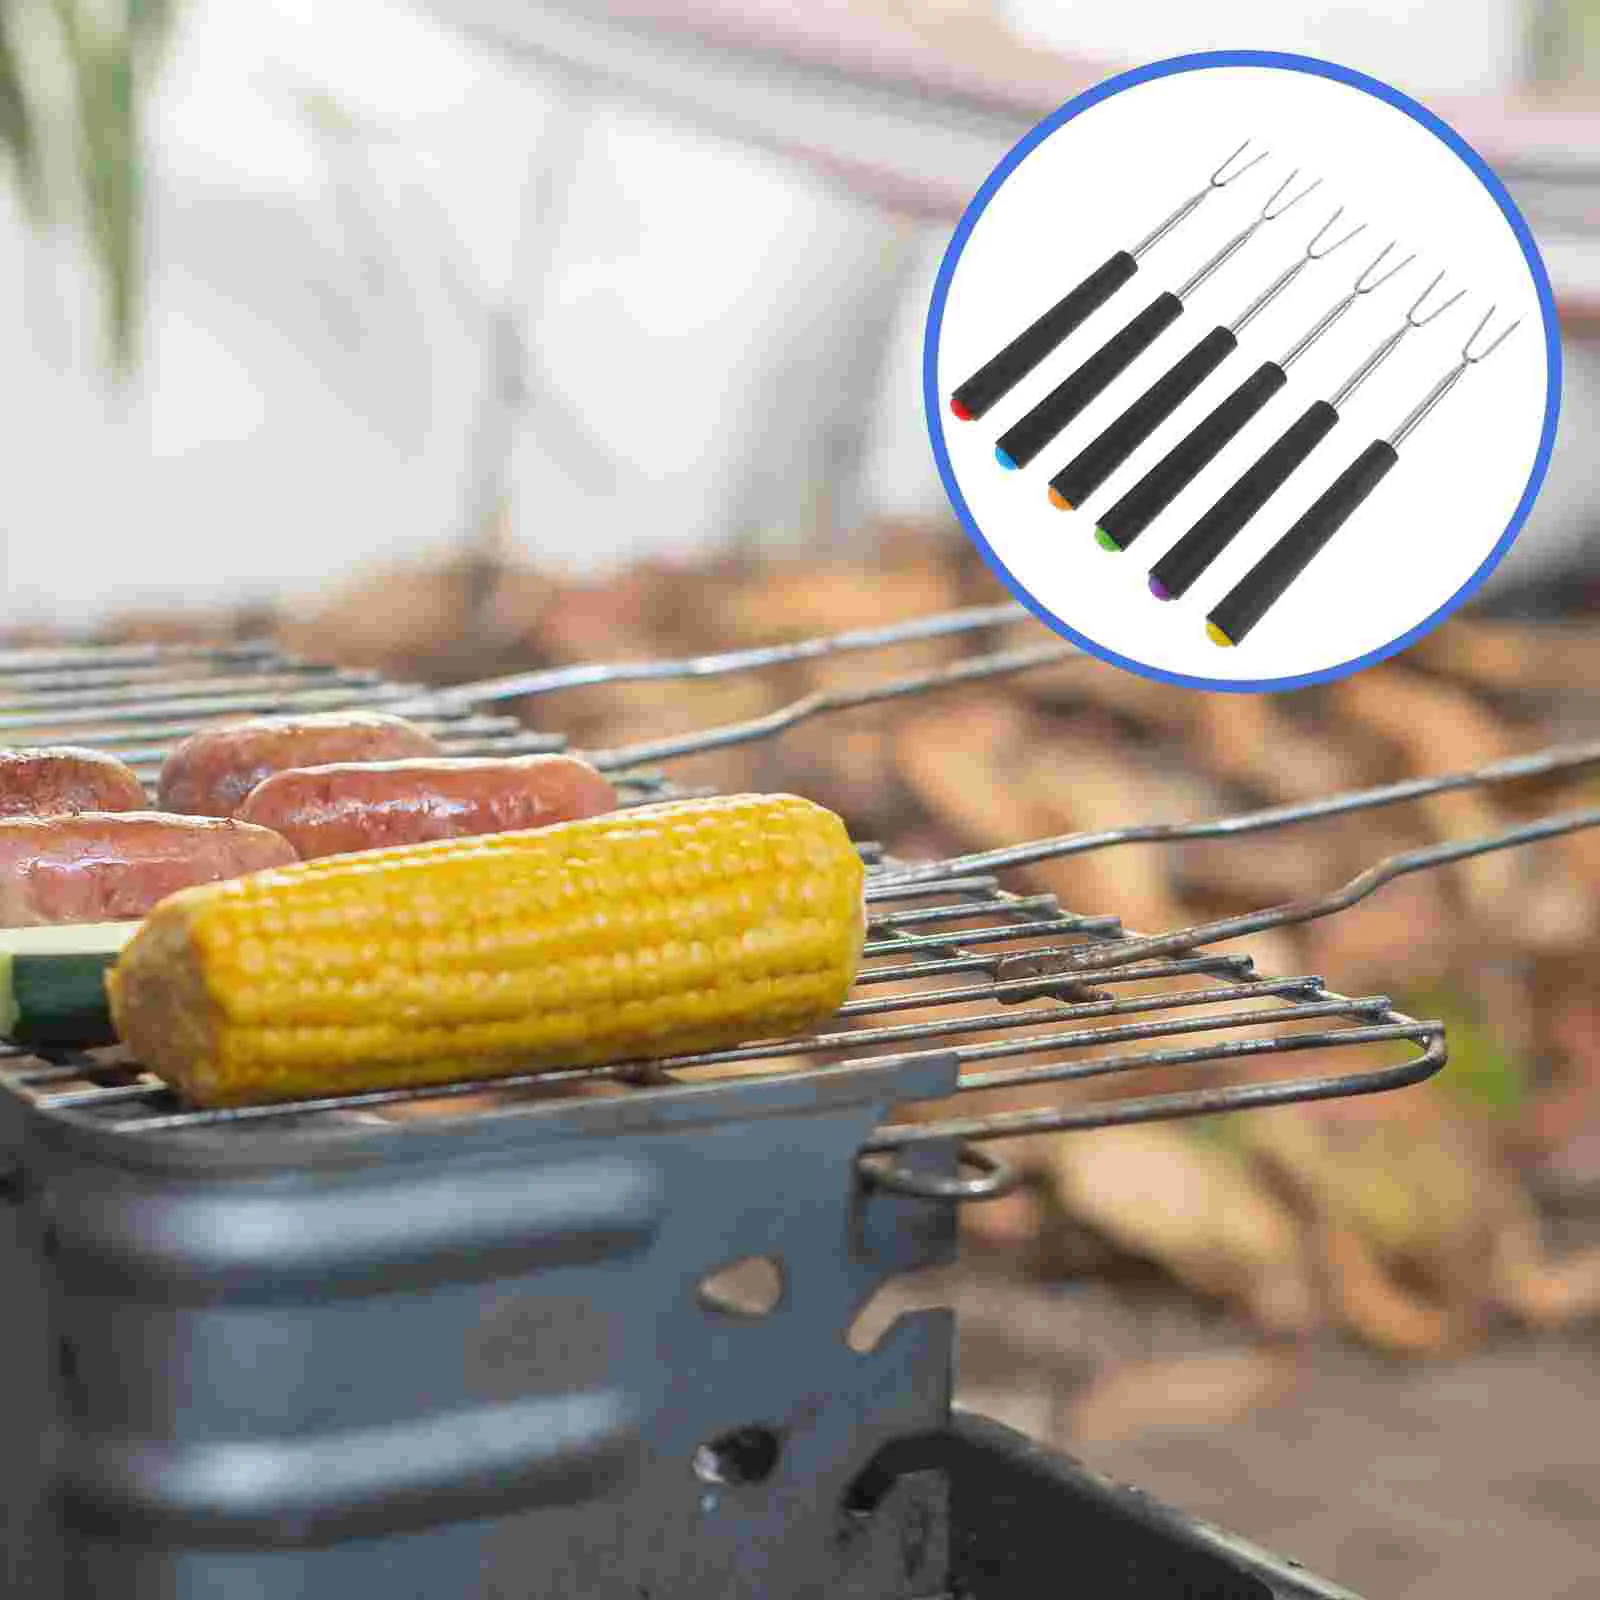 

6 Pcs Telescopic Barbecue Fork Grill Outdoor Kitchen Roasting Skewers Stainless Steel Meat Stick Abs Bbq Grilling